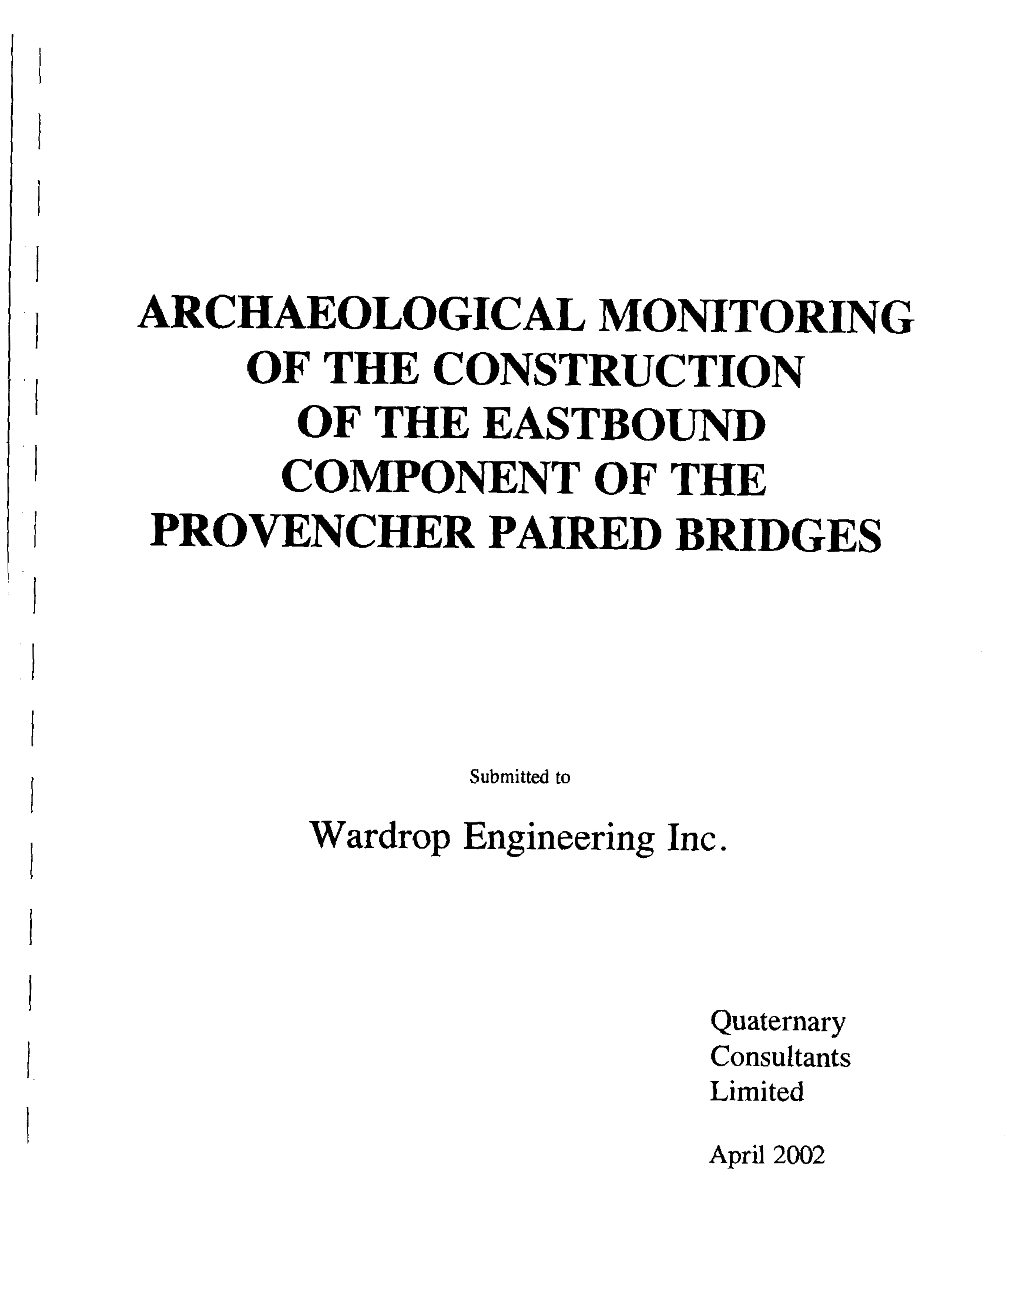 Archaeological Monitoring of the Construction of the Eastbound Component of the Provencher Paired Bridges